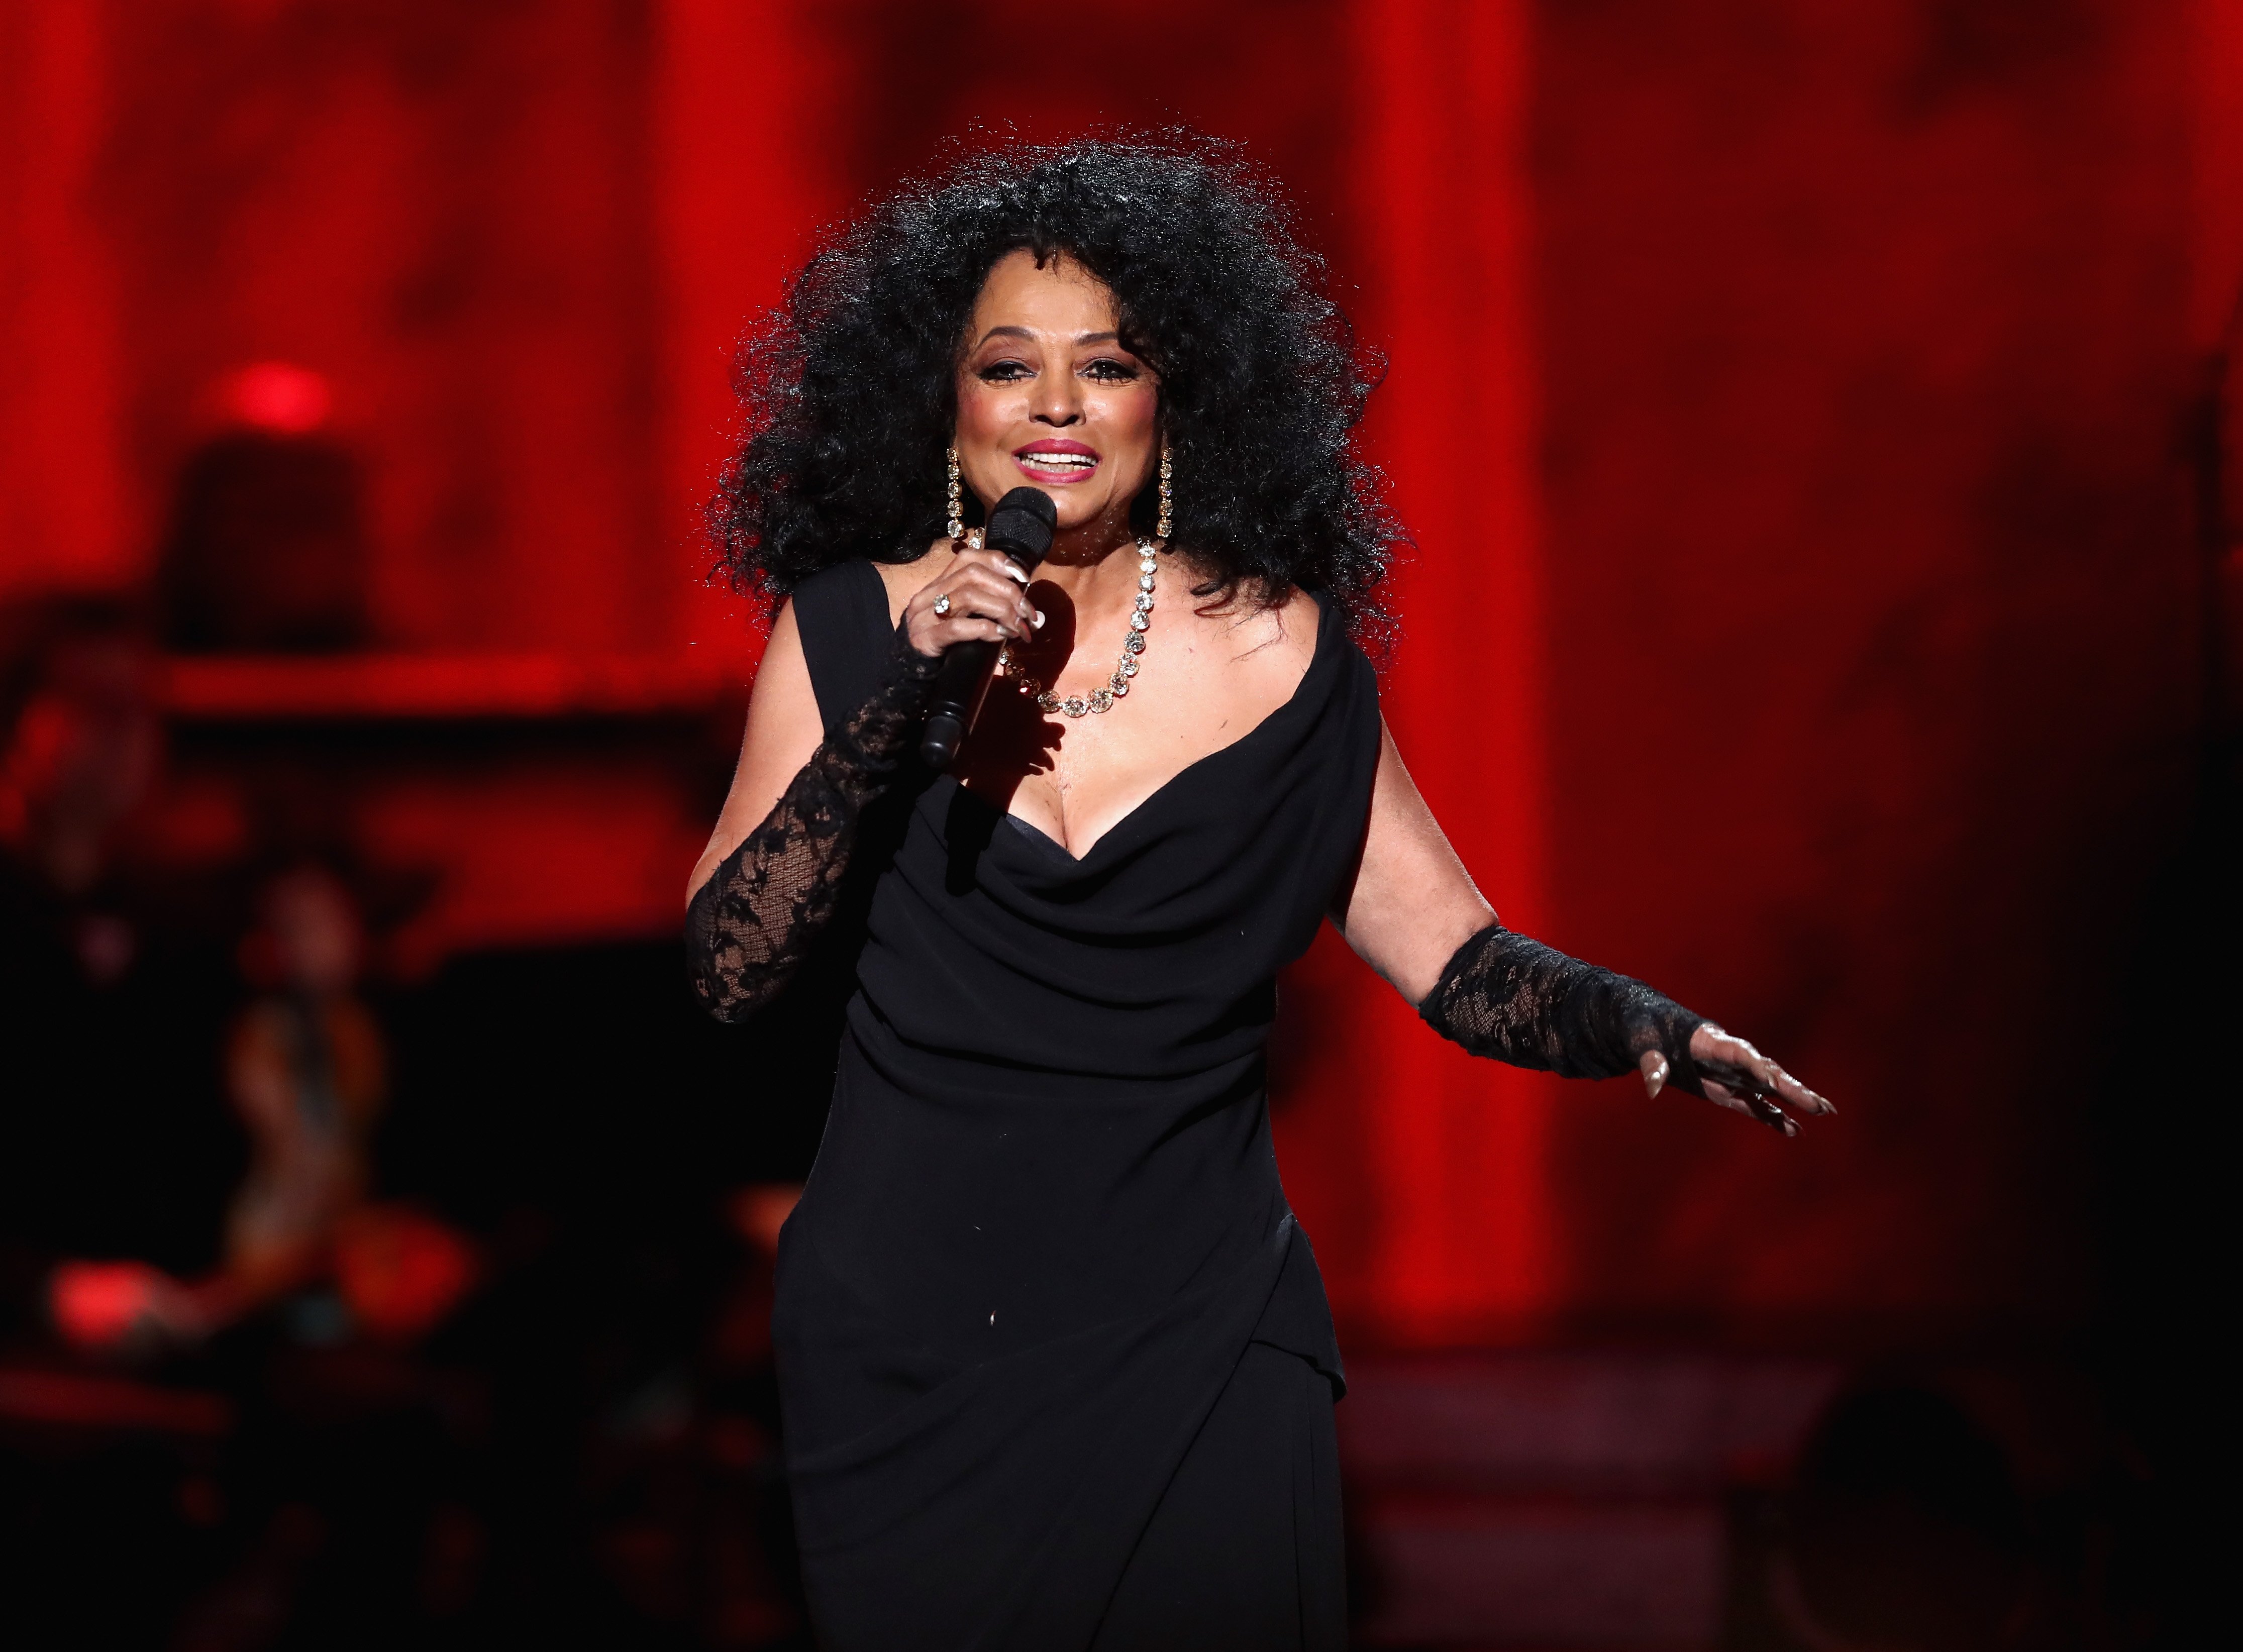 Diana Ross performs onstage during "Motown 60: A GRAMMY Celebration" at Microsoft Theater on February 12, 2019 | Photo: Getty Images